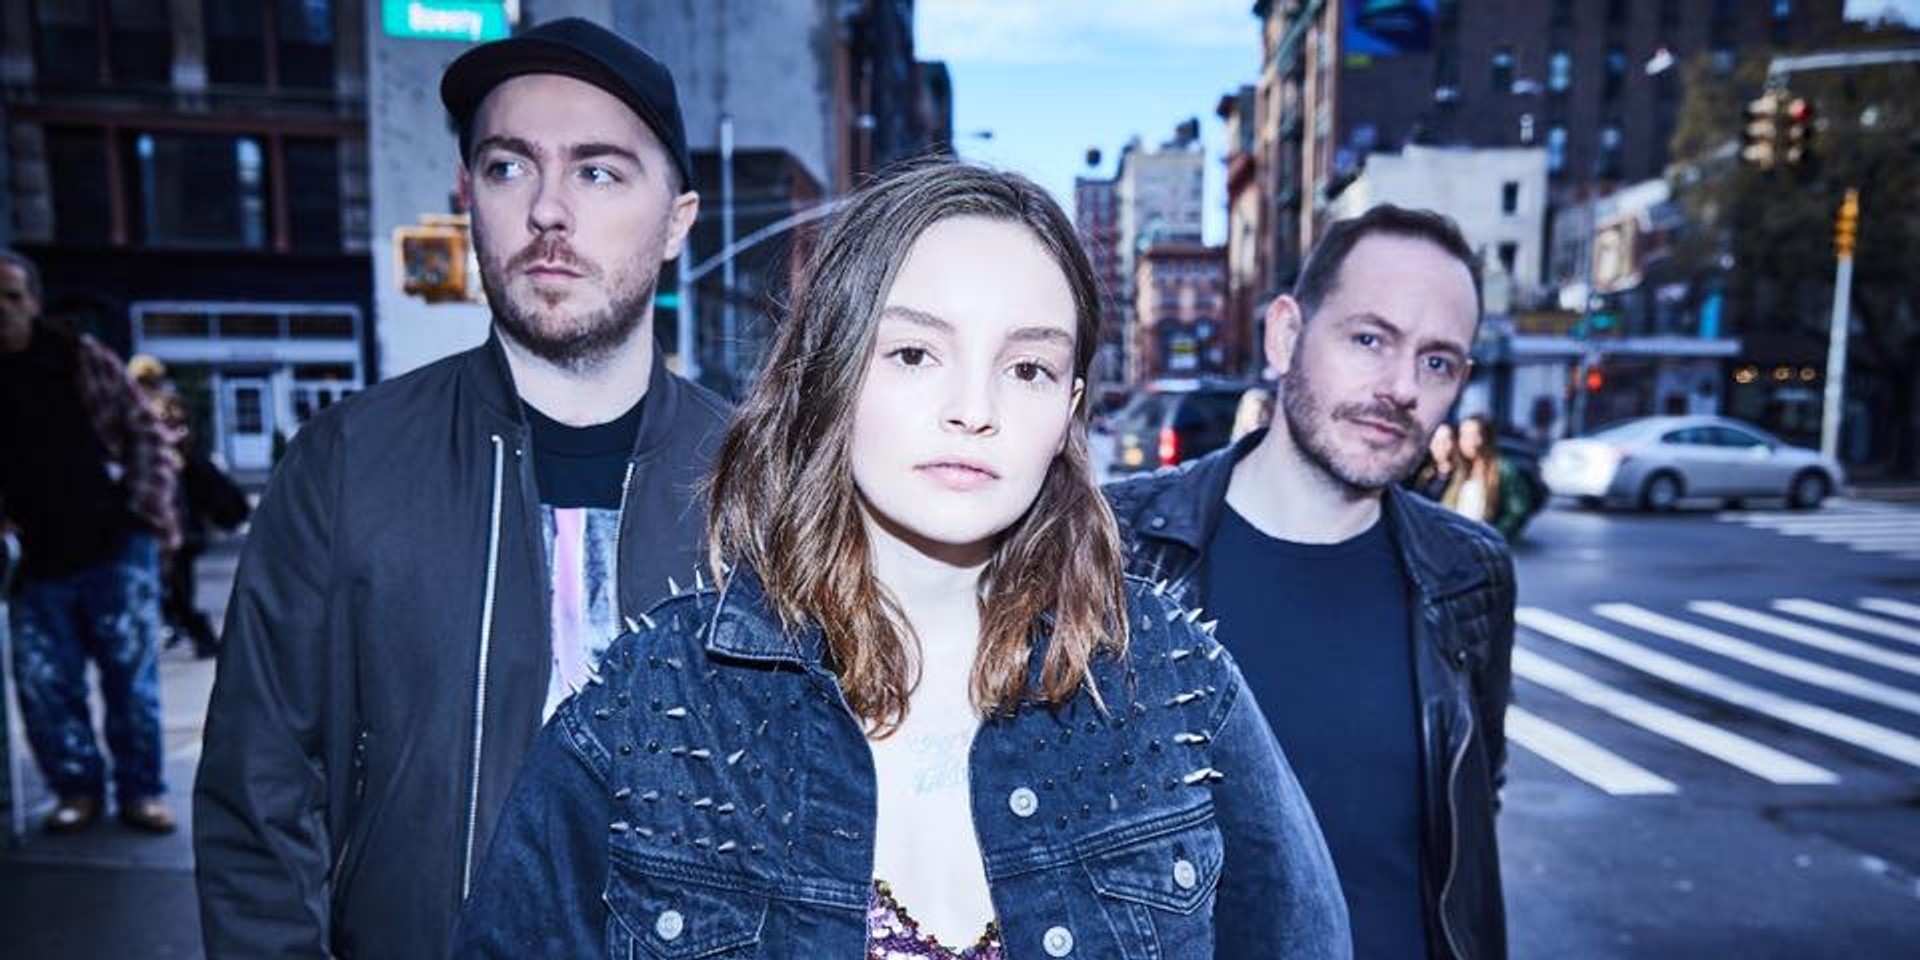 CHVRCHES release new song 'Get Out' – listen